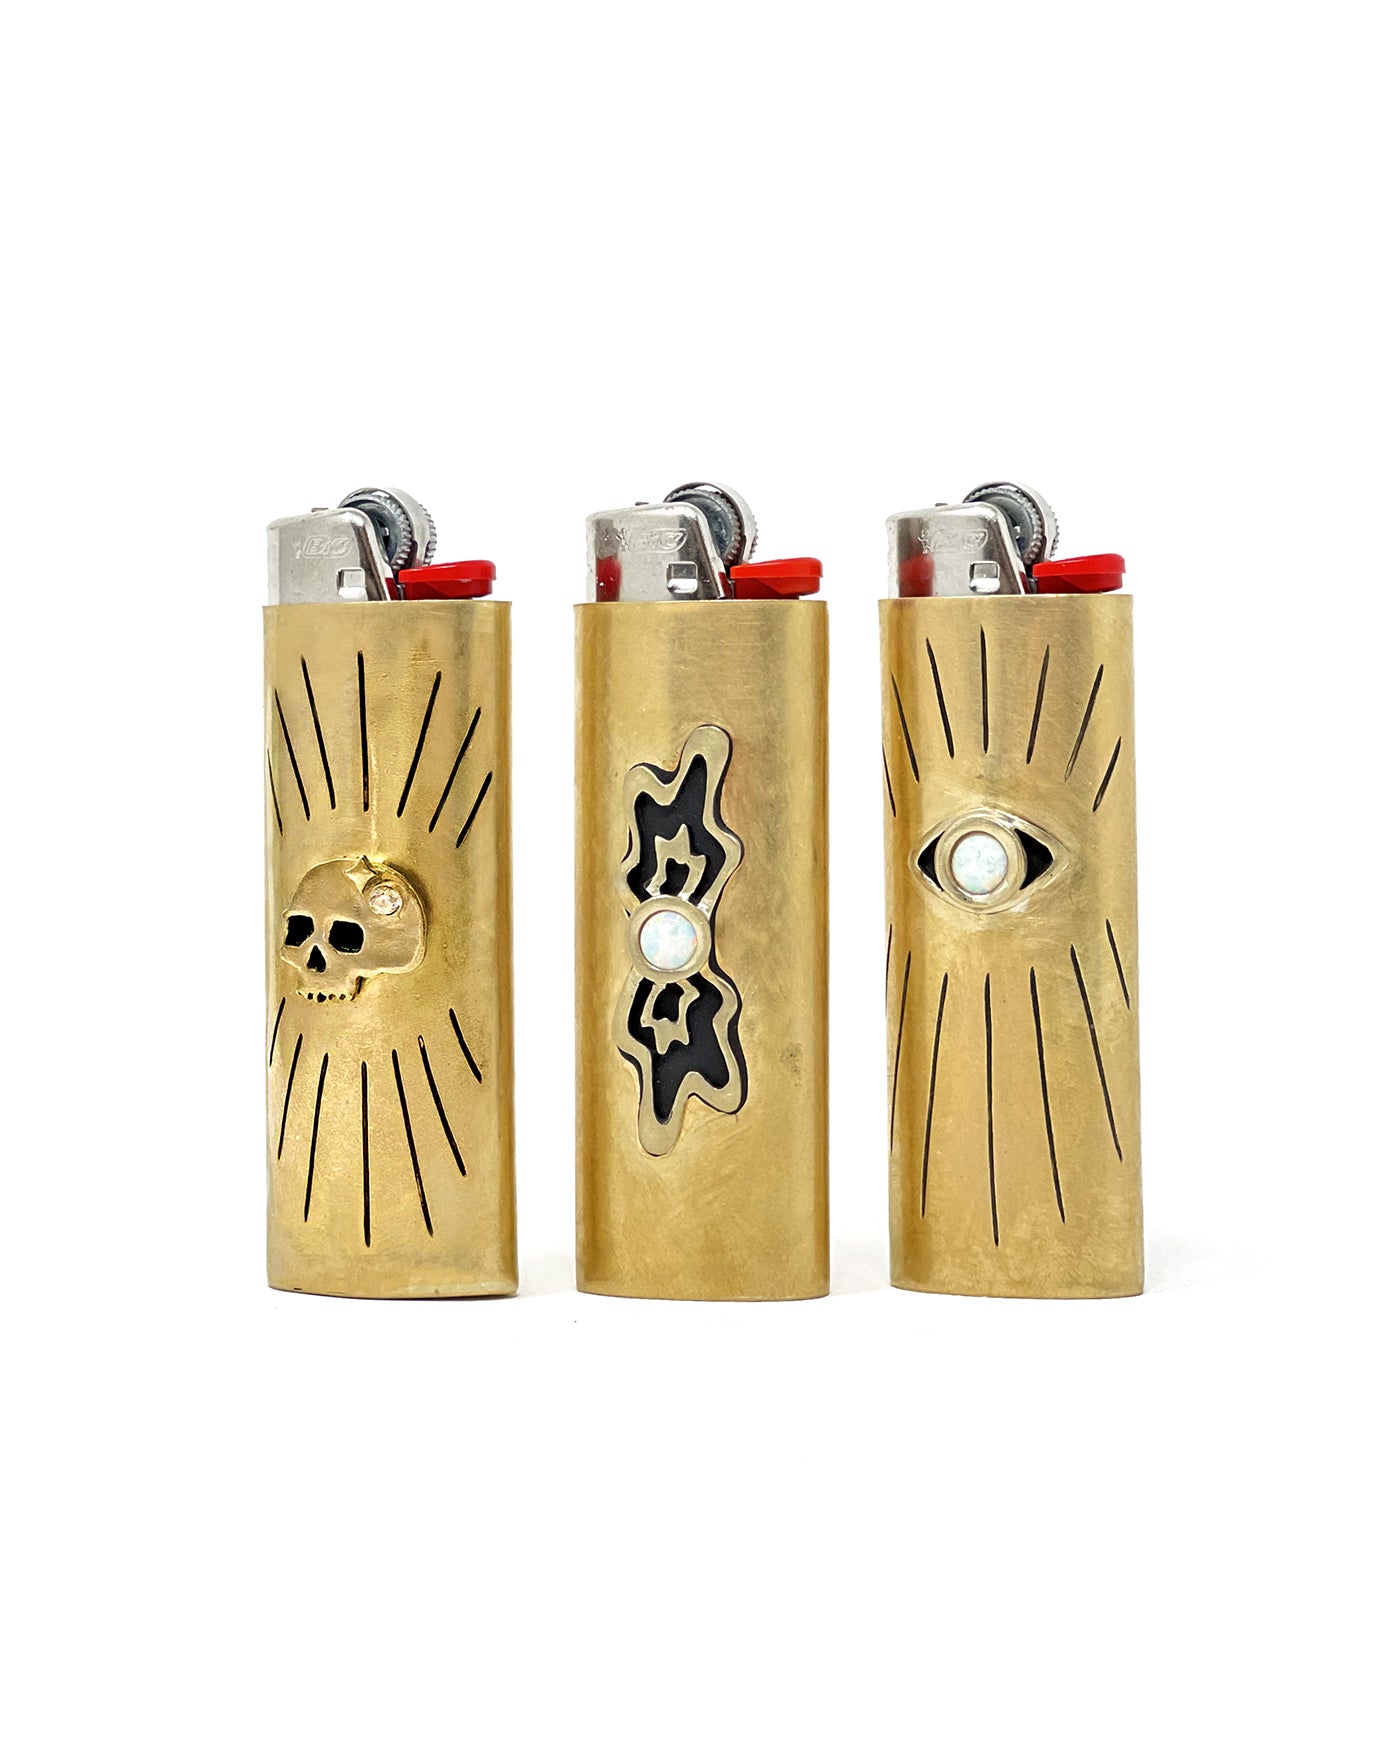 Brass Lighter Cases by Therese Kuempel